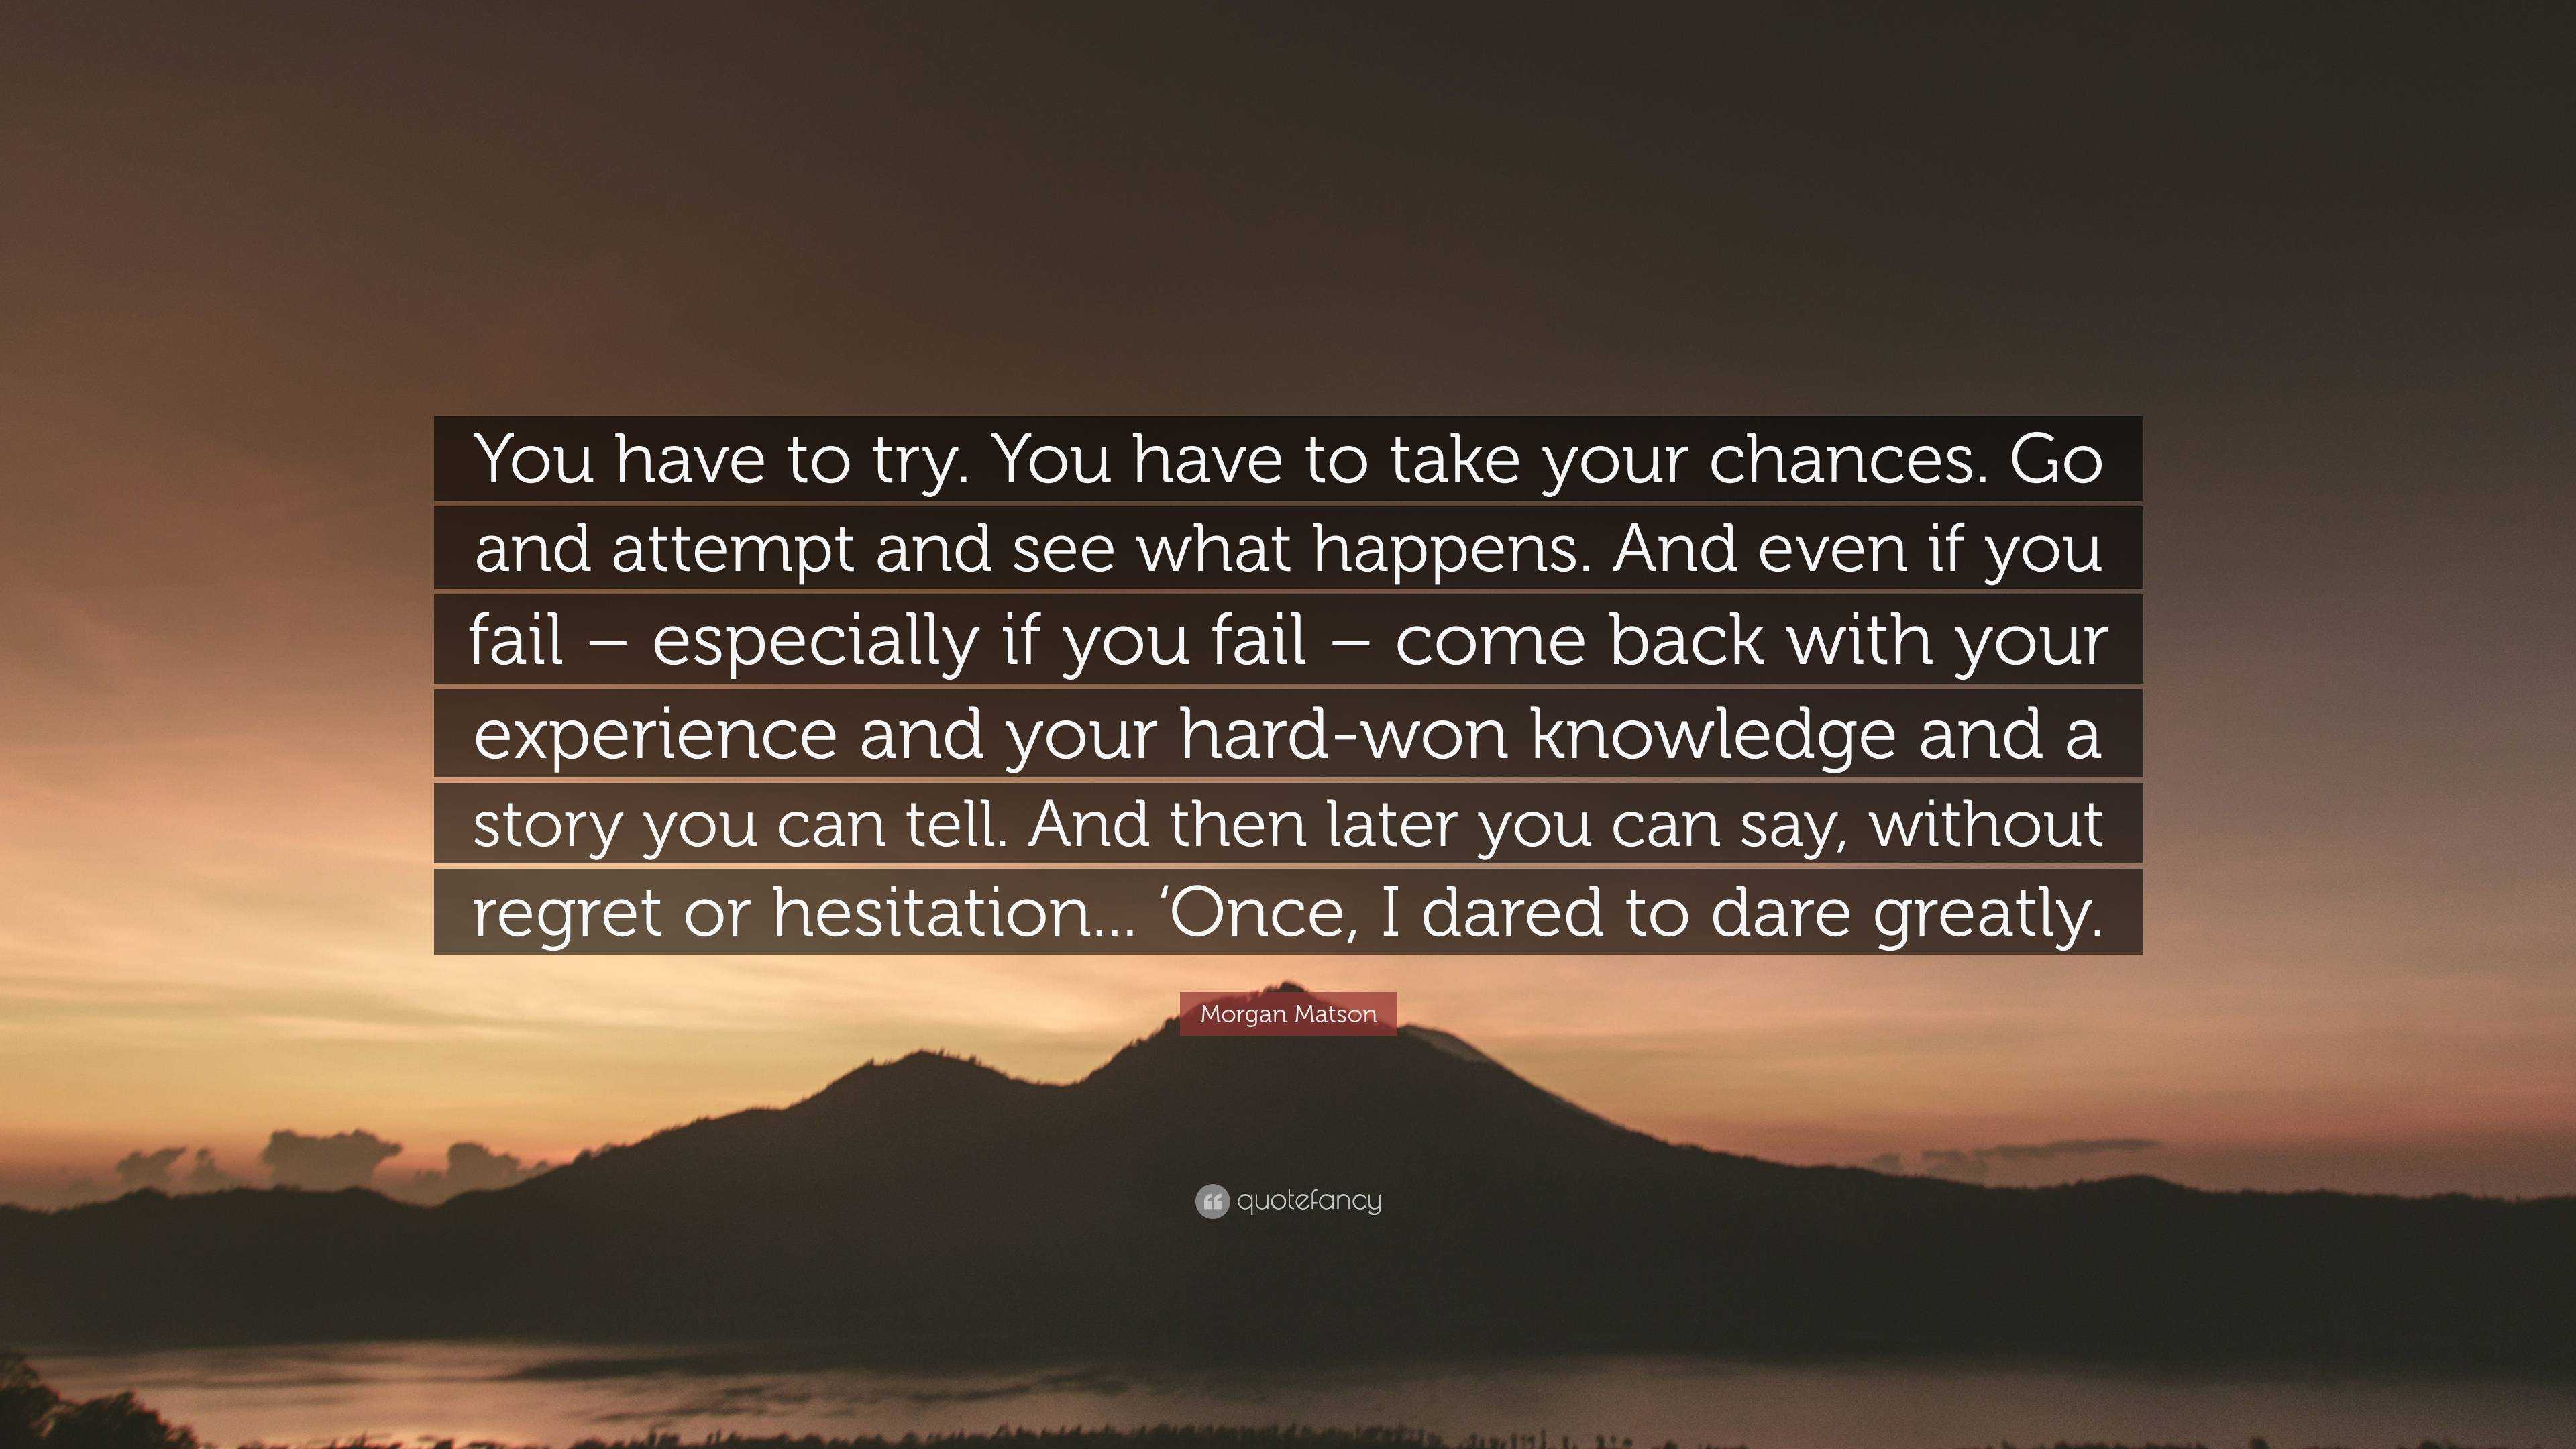 Morgan Matson Quote: “You have to try. You have to take your chances ...